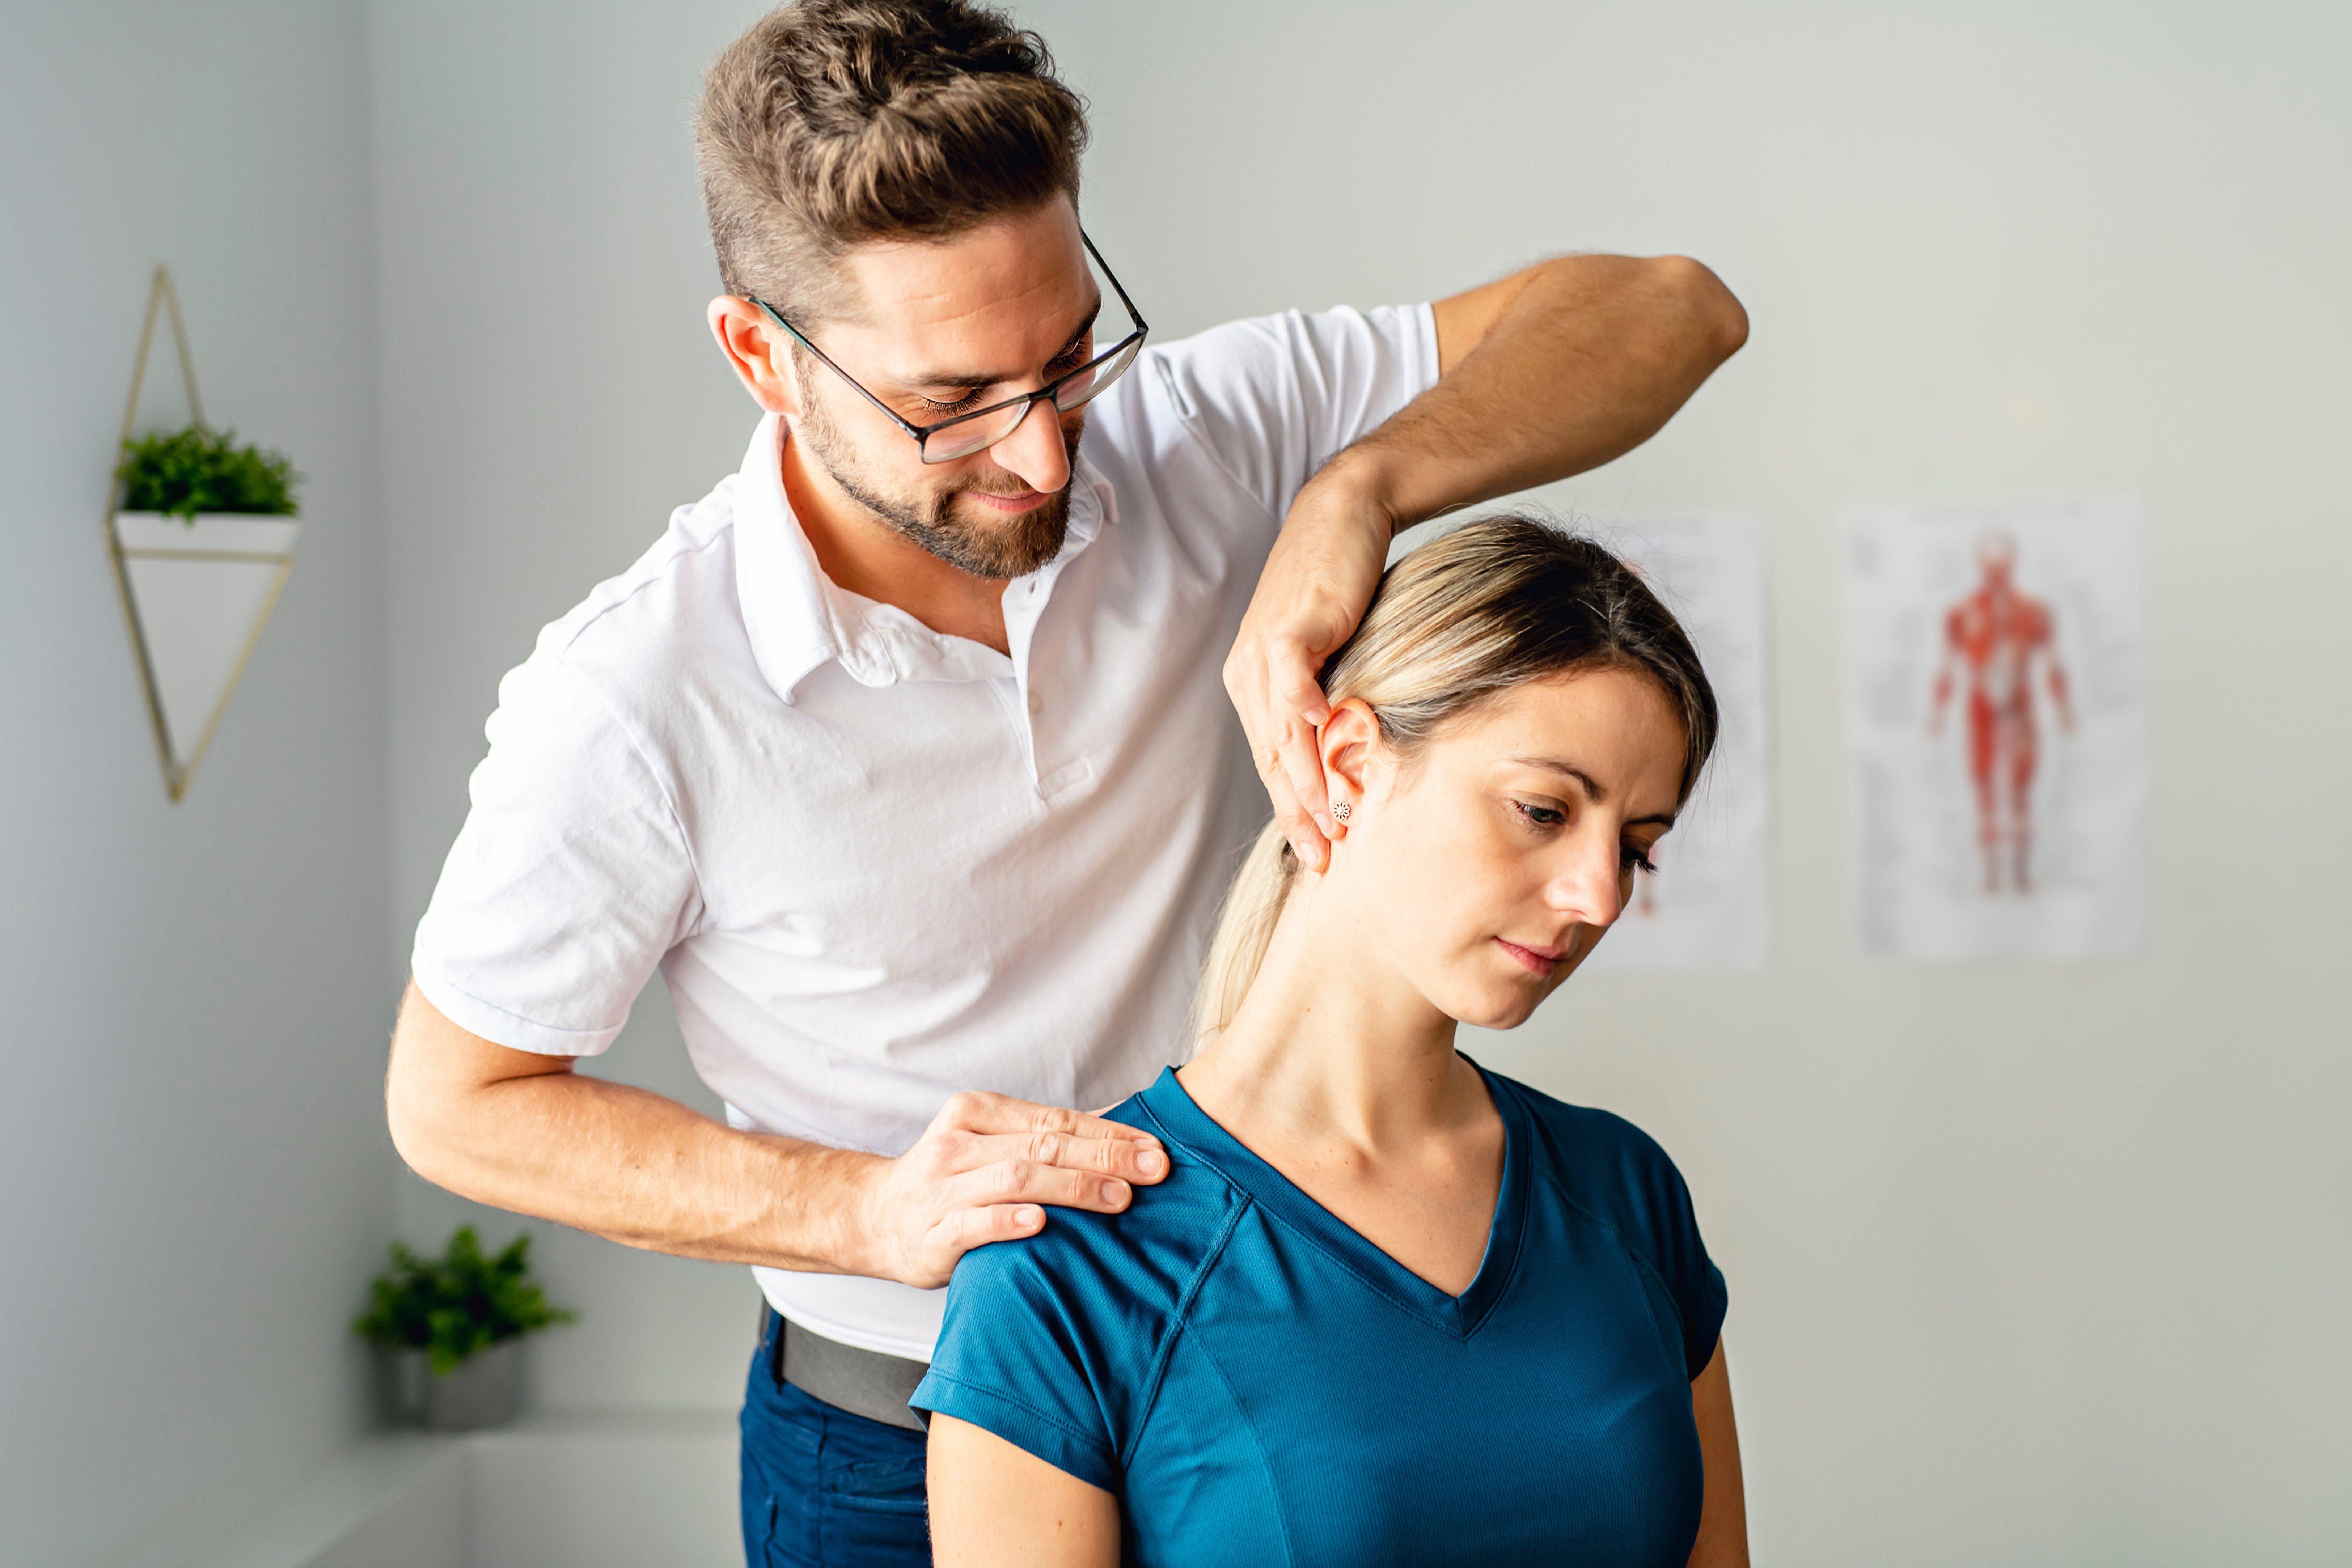 Chiropractic Care for Neck Pain: A Safe and Natural Alternative to Pain Medication